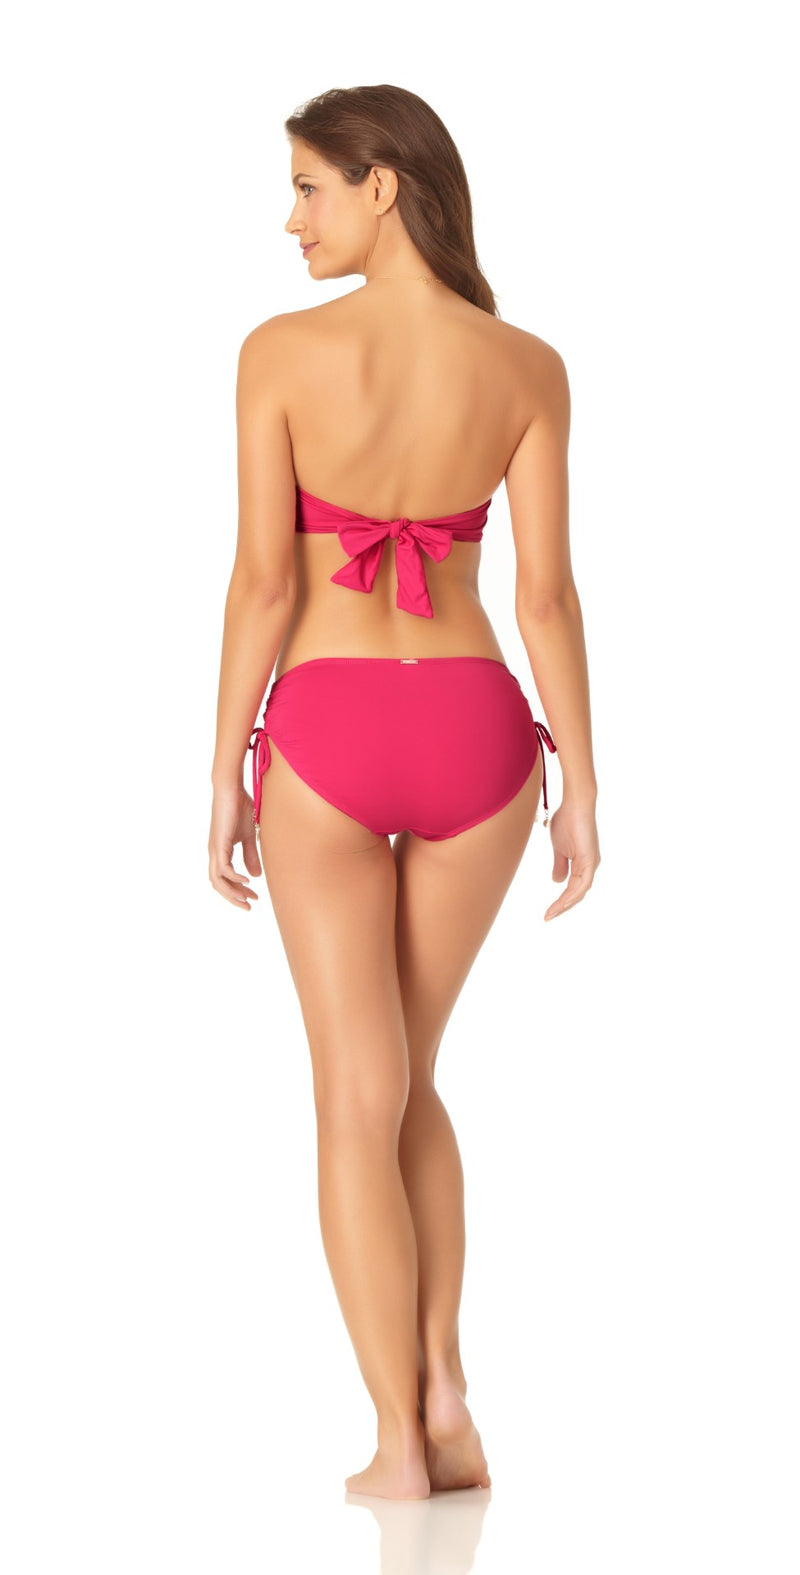 South Beach Swimsuits Anne Cole Live in Color Control Super High